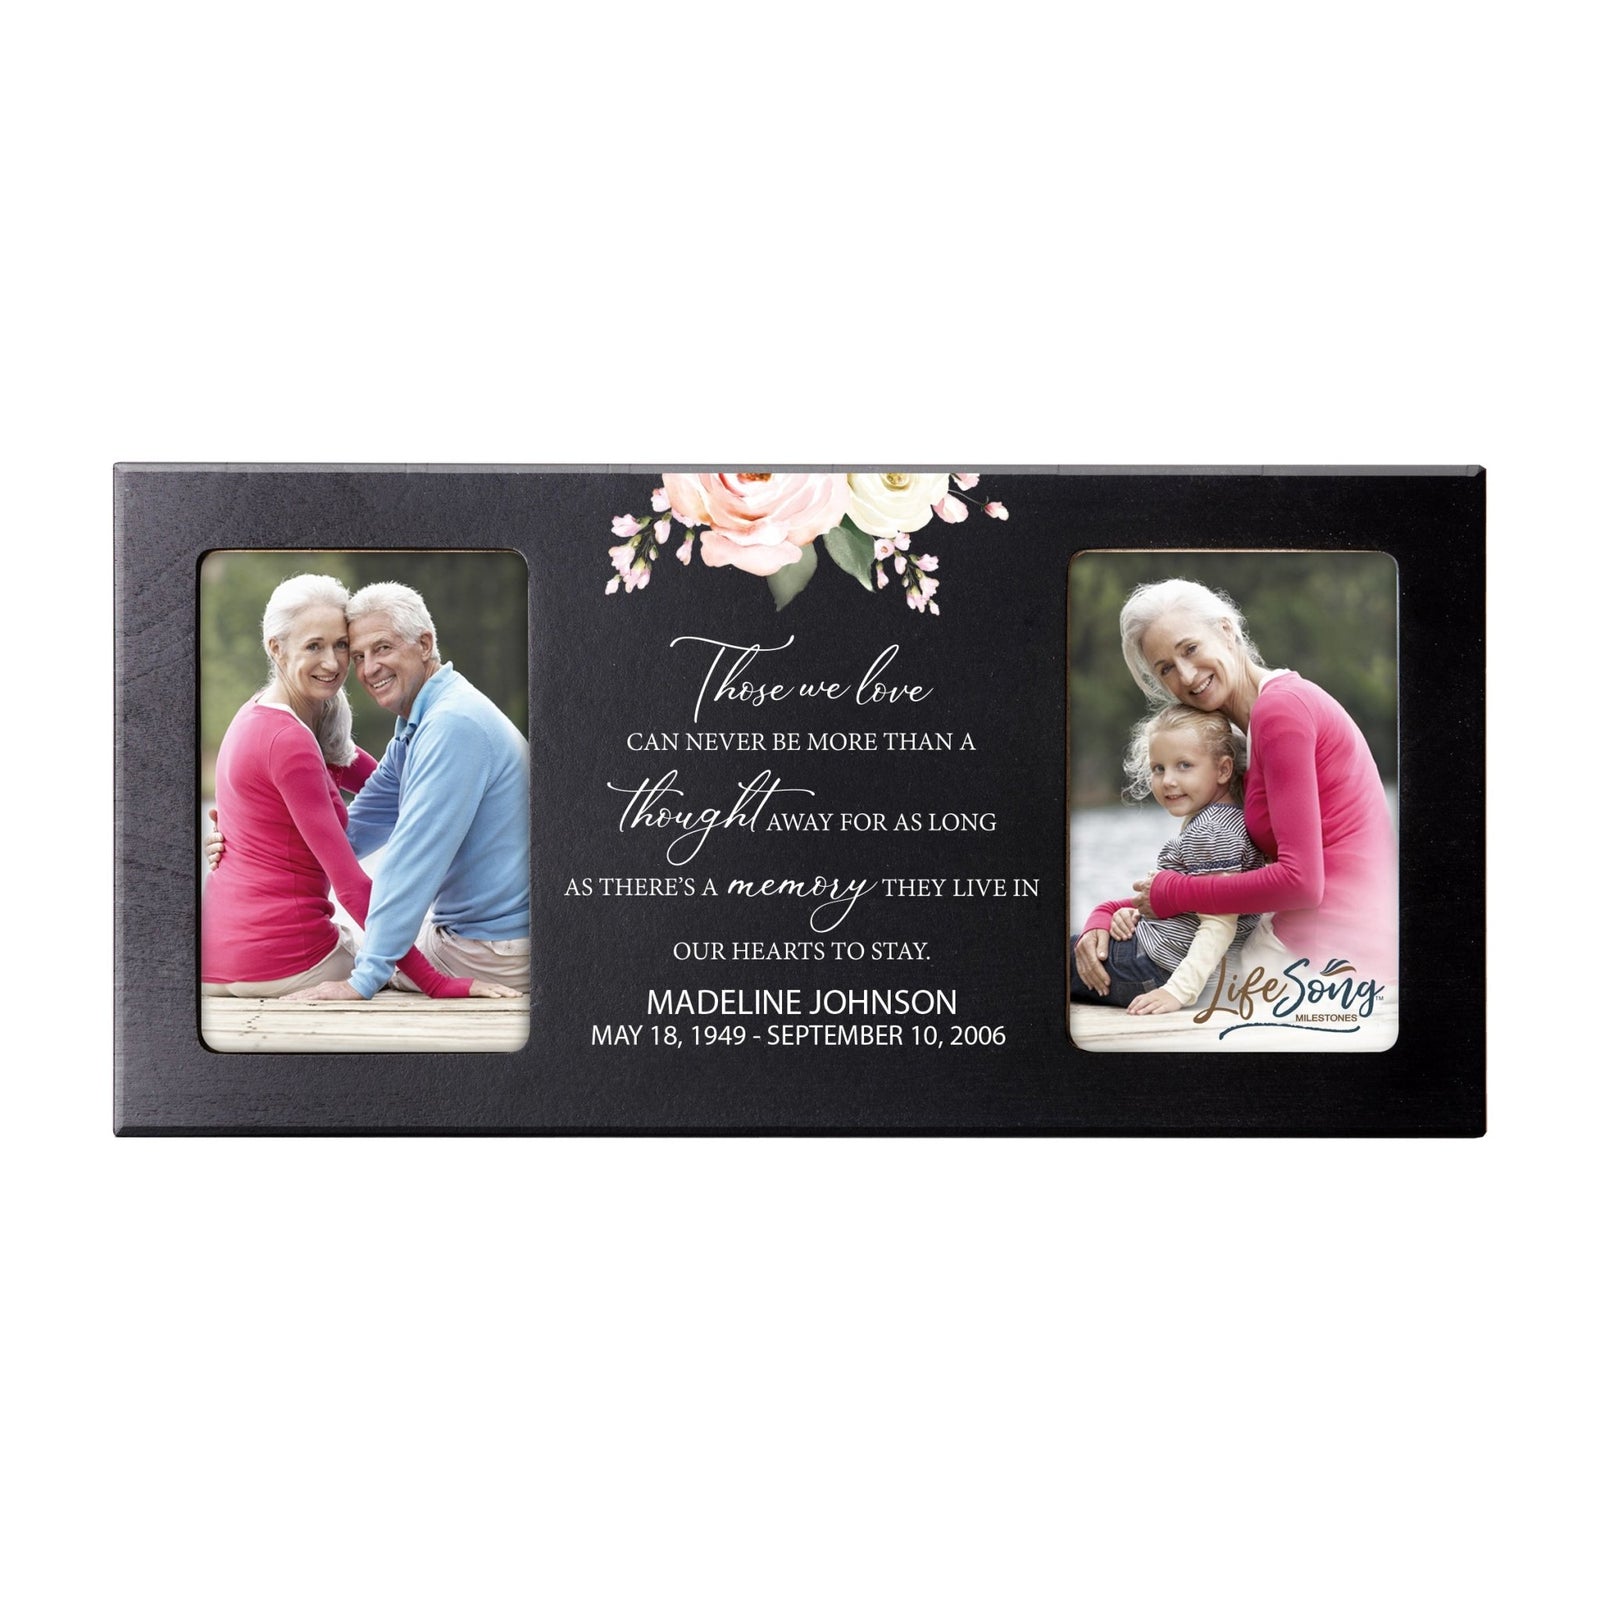 Custom Memorial Picture Frame 16x8in Holds Two 4x6in Photos - Our Hearts To Stay - LifeSong Milestones